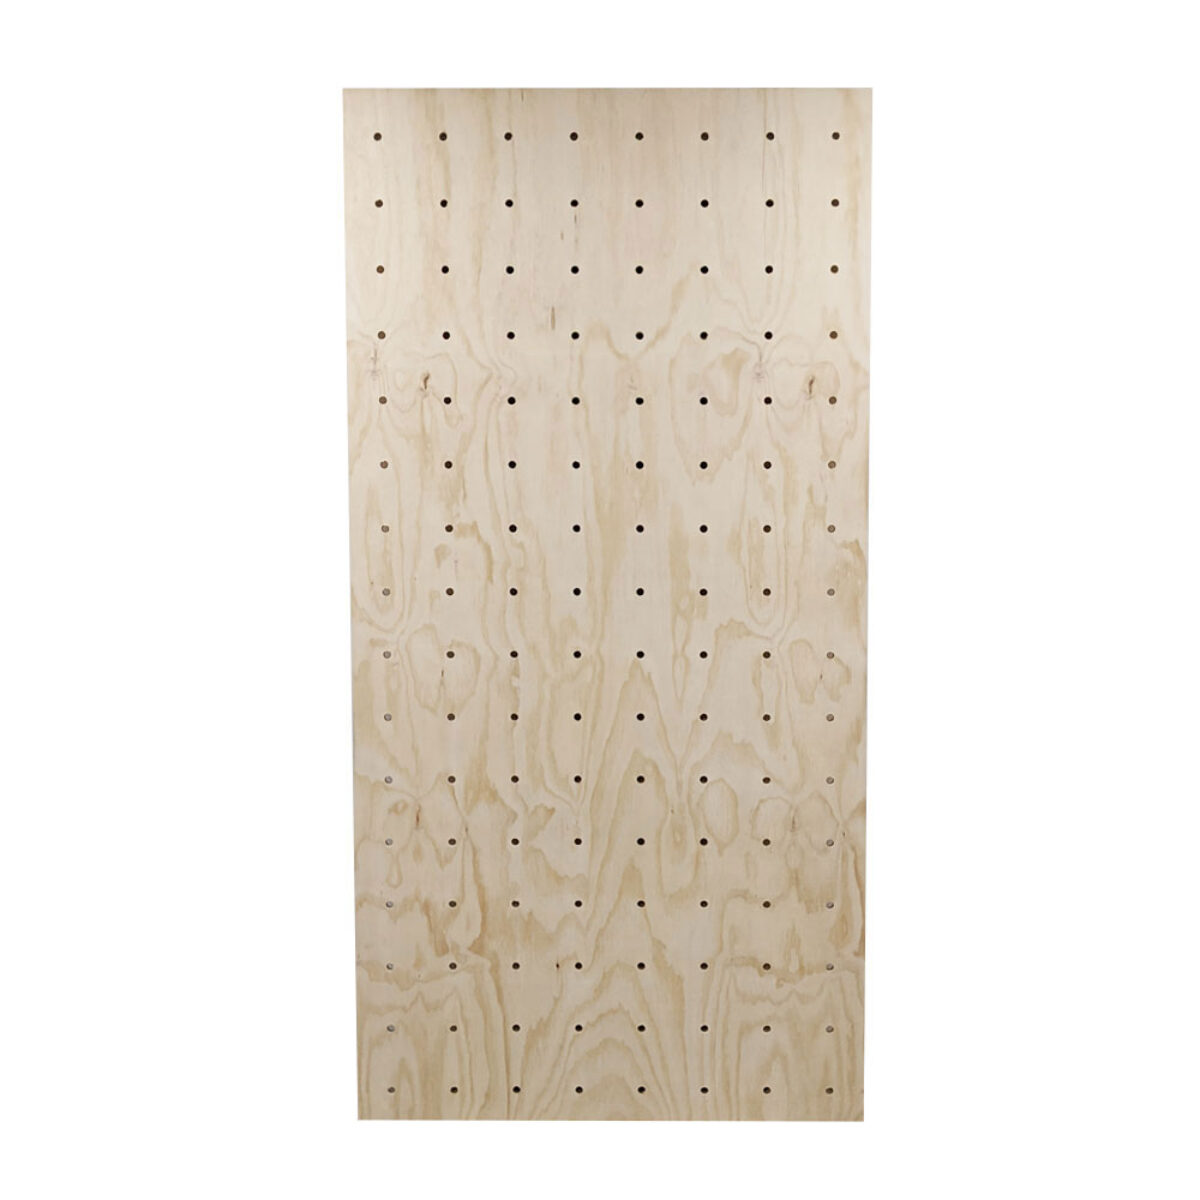 Peg Base Cut to Size Birch Plywood Standard and Bespoke Pegboards Peg Boards 